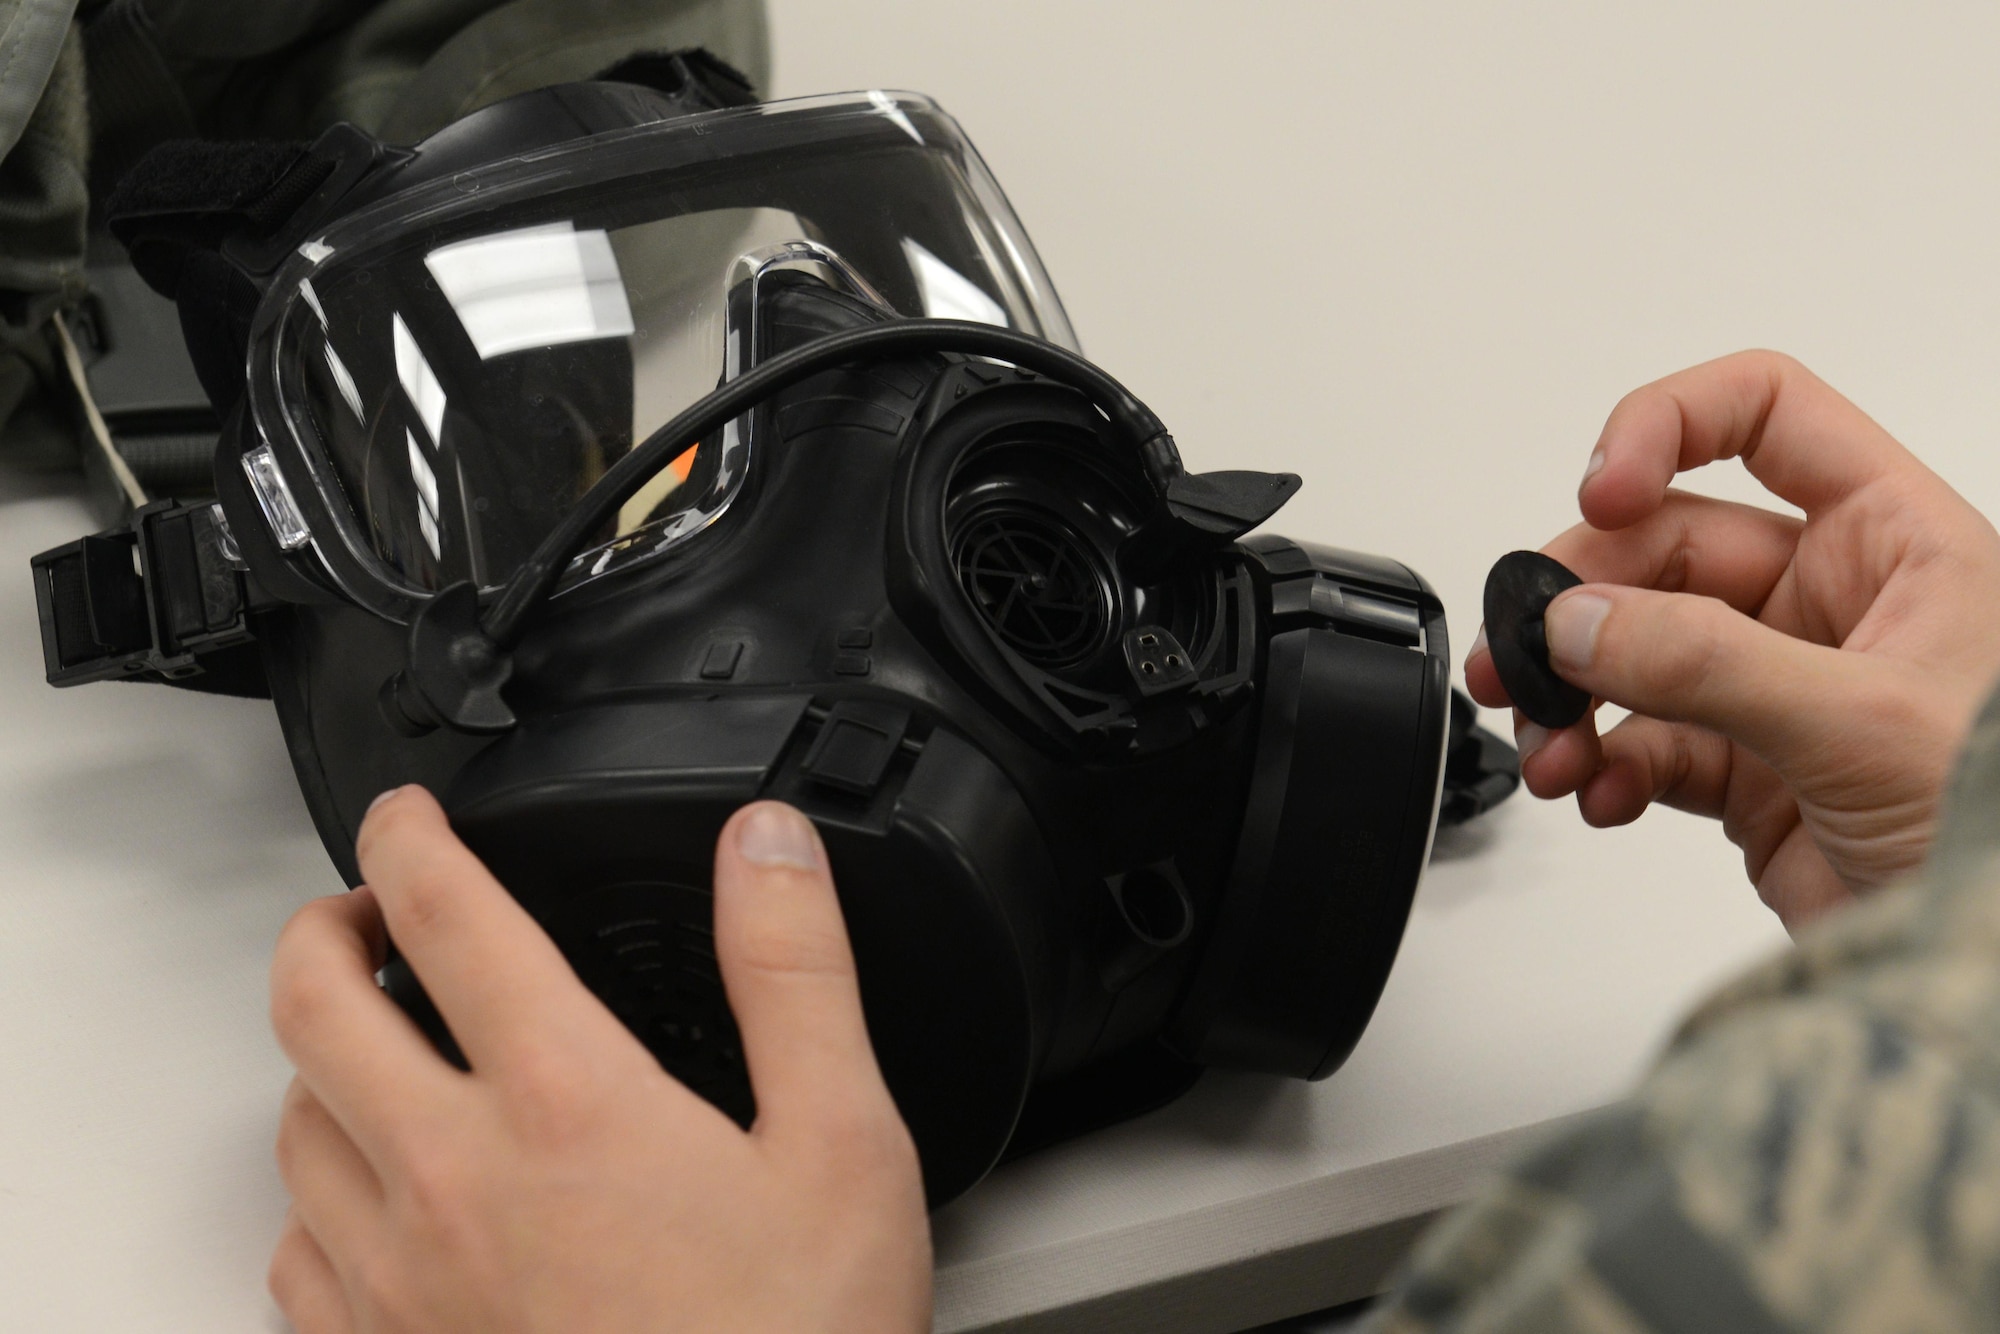 An Airman inspects his gas mask during a Chemical, Biological, Radiological, and Nuclear defense survival skills training class hosted by the 773d Civil Engineer Squadron emergency management flight at Joint Base Elmendorf-Richardson, Alaska, Aug. 22. The two-hour CBRN class reminds Airmen of the various equipment and proper procedures used pre- and post-attack, and puts the Airmen’s knowledge to the test with an application of this information in full Mission Oriented Protected Posture gear.